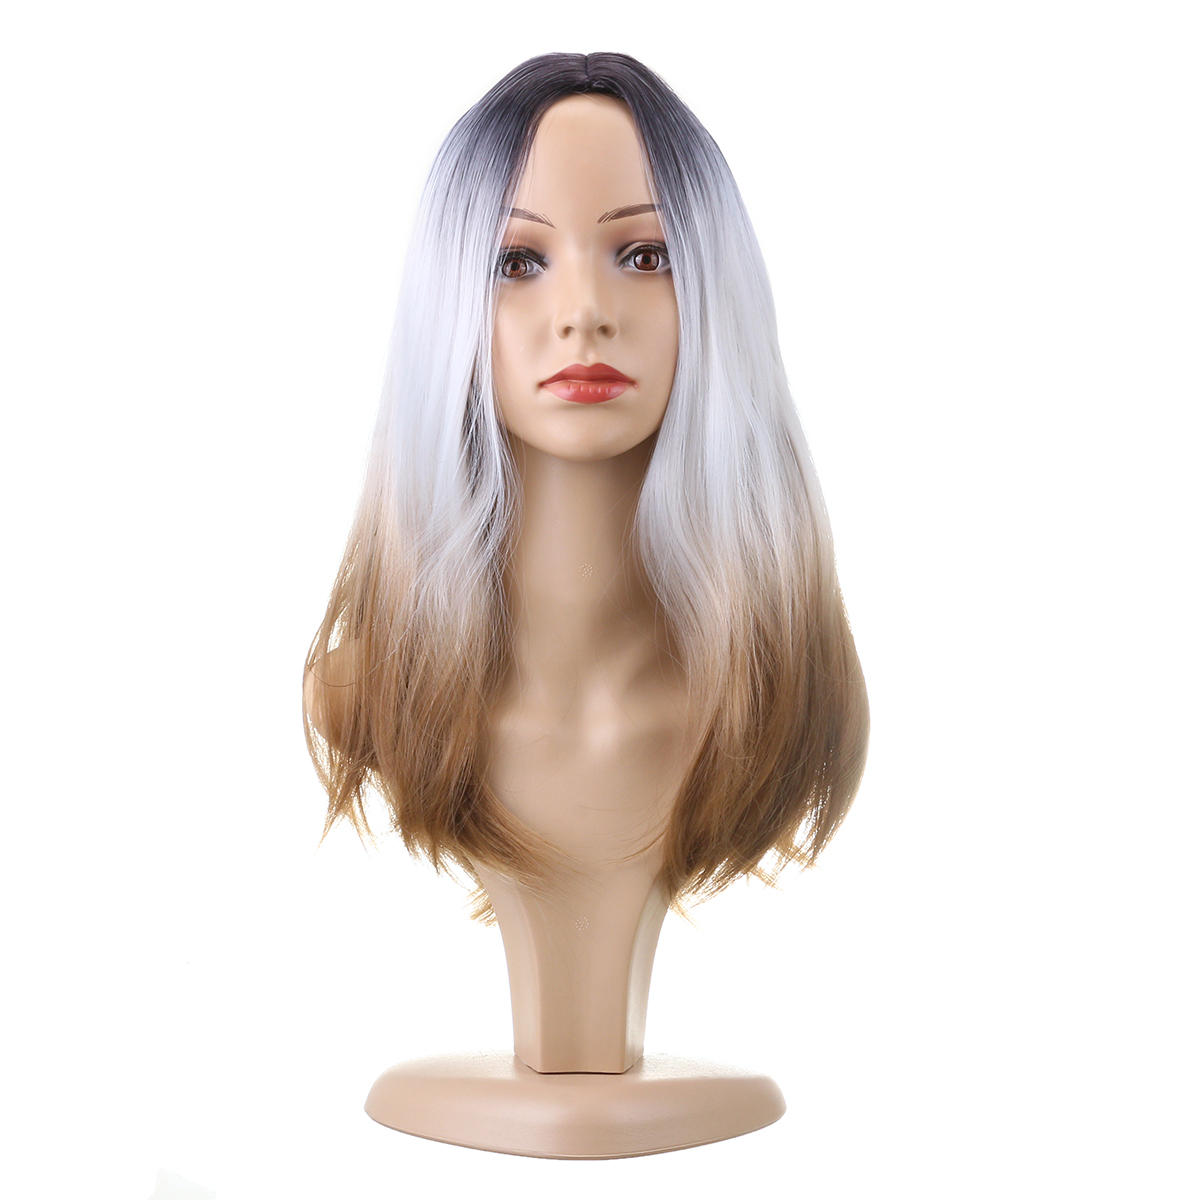 

hair 26" 270g Long Synthetic Hair Wig Adjustable Ombre Grey Body Wavy Hair Wigs For Women Cosplay Heat Resistant 1PC